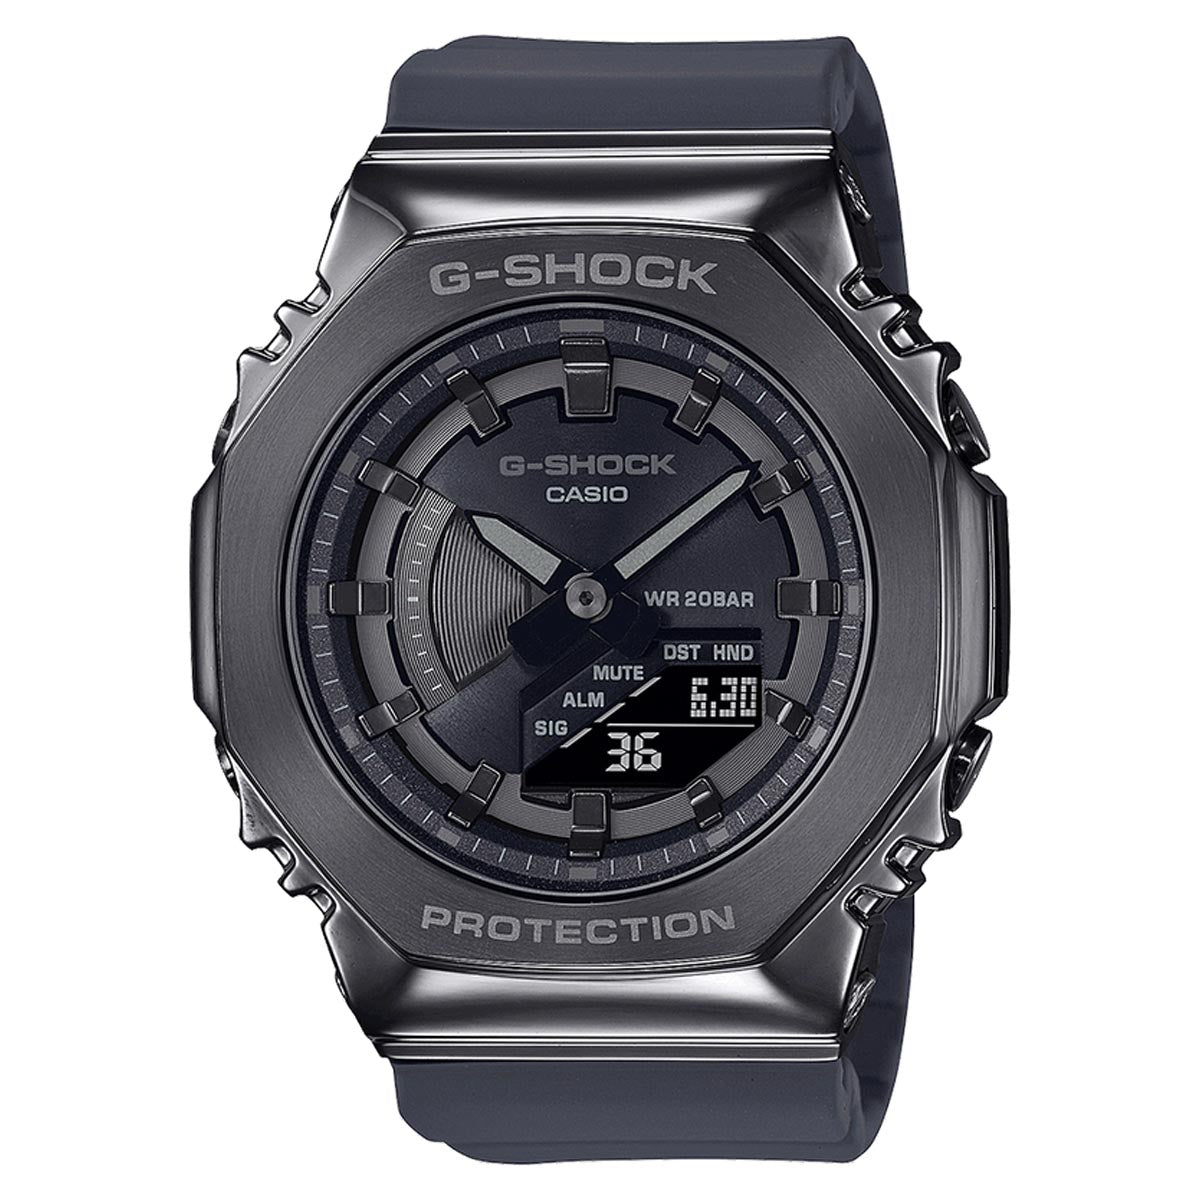 G Shock 2100 Series Watch with Black Stainless Steel Dial and Black Resin Strap  (quartz movement)